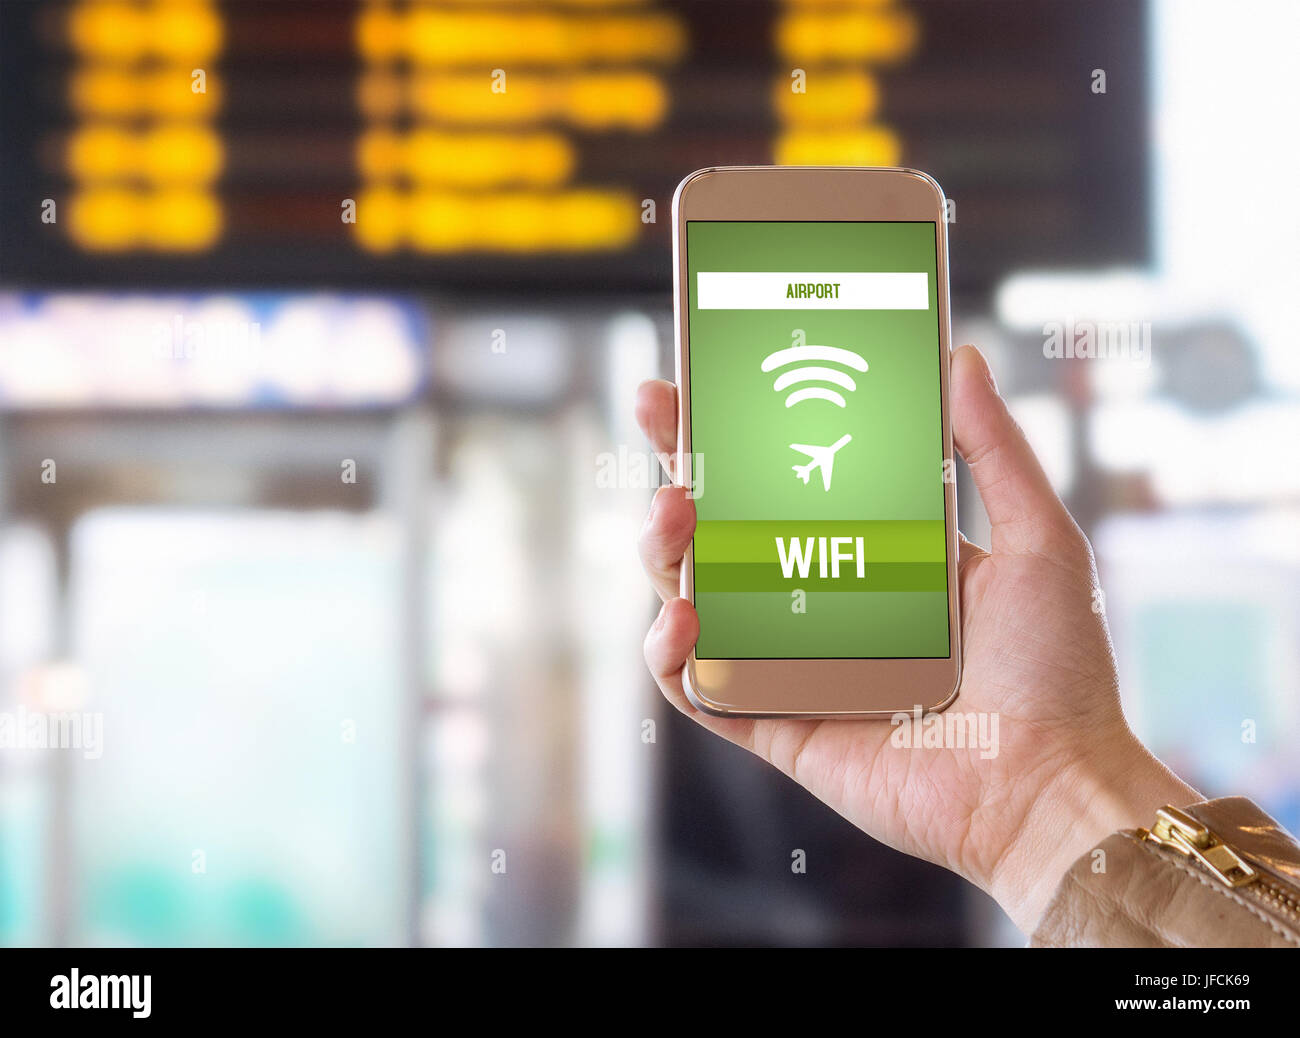 Airport wifi. Free wireless internet connection in terminal. Browsing web and going online before flight. Woman holding smart phone in hand. Stock Photo